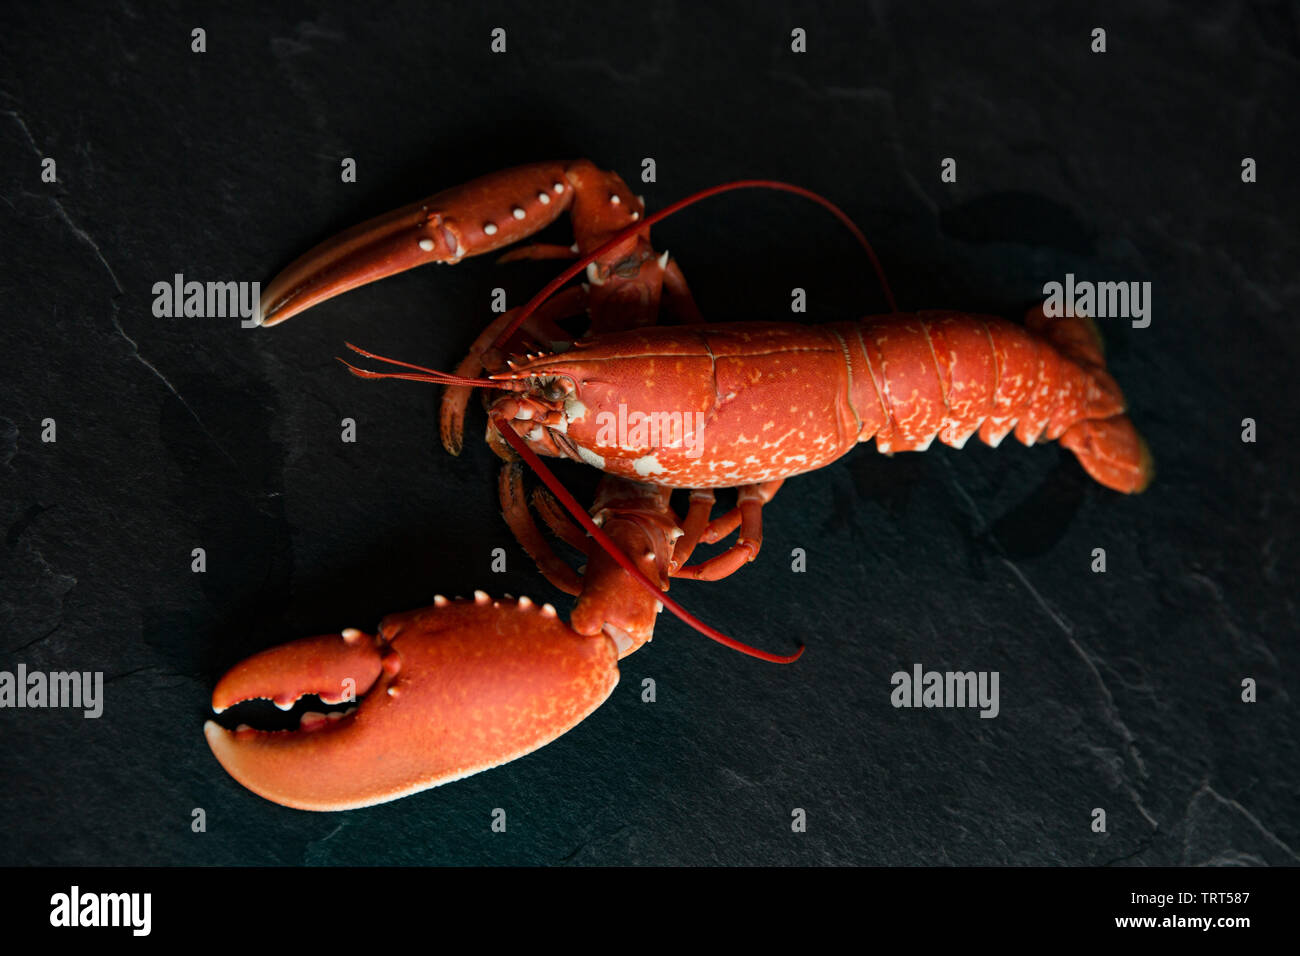 A boiled, cooked lobster, Homarus gammarus, that was caught in a lobster pot set in the English Channel. Homarus gammarus is also known as the common Stock Photo